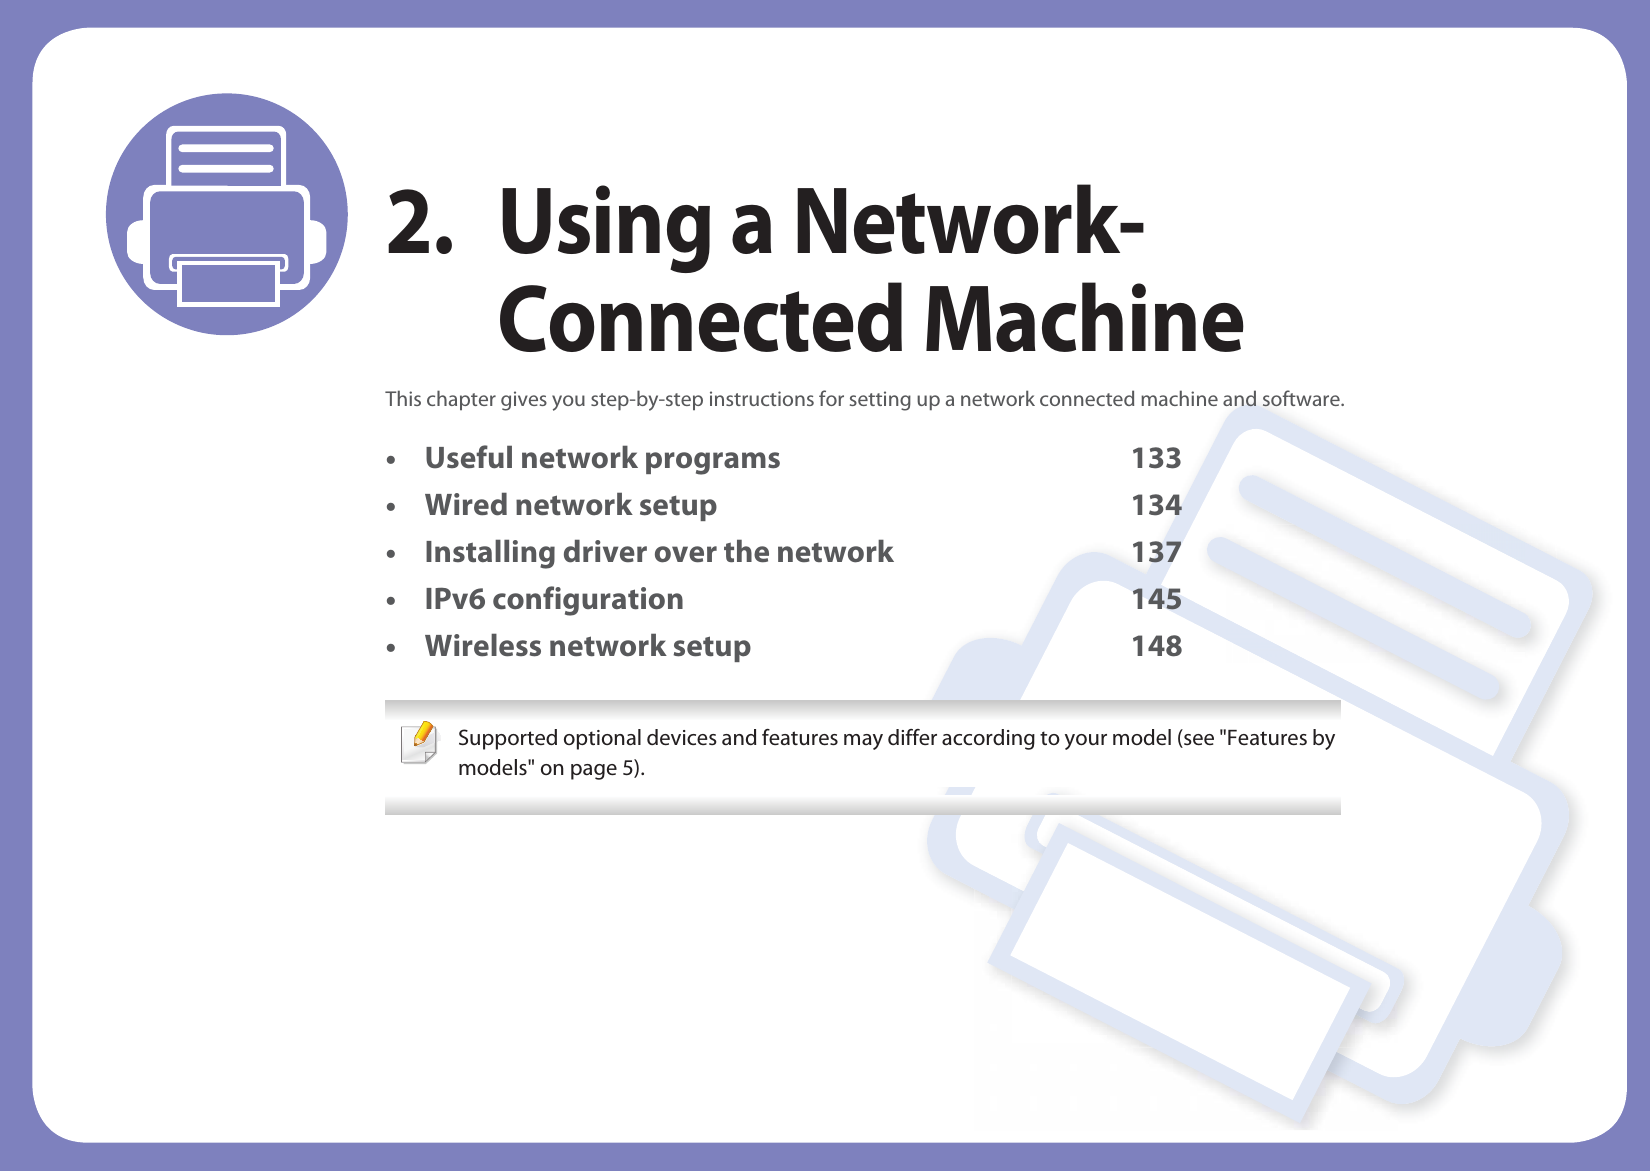 2. Using a Network-Connected MachineThis chapter gives you step-by-step instructions for setting up a network connected machine and software.• Useful network programs 133• Wired network setup 134• Installing driver over the network 137• IPv6 configuration 145• Wireless network setup 148 Supported optional devices and features may differ according to your model (see &quot;Features by models&quot; on page 5). 